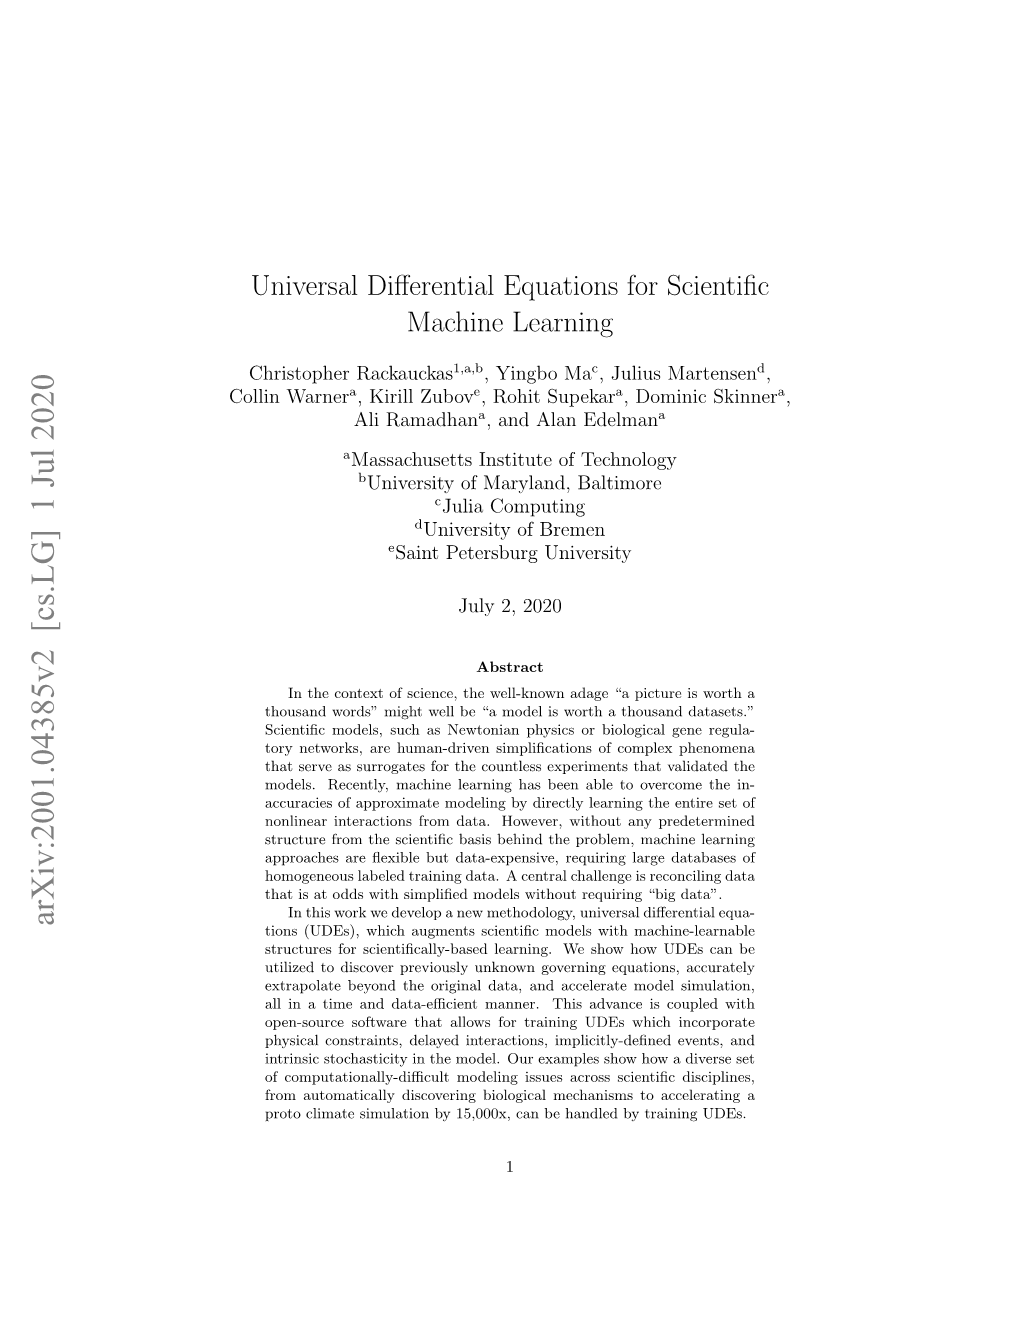 Arxiv:2001.04385V2 [Cs.LG] 1 Jul 2020 Tions (Udes), Which Augments Scientiﬁc Models with Machine-Learnable Structures for Scientiﬁcally-Based Learning